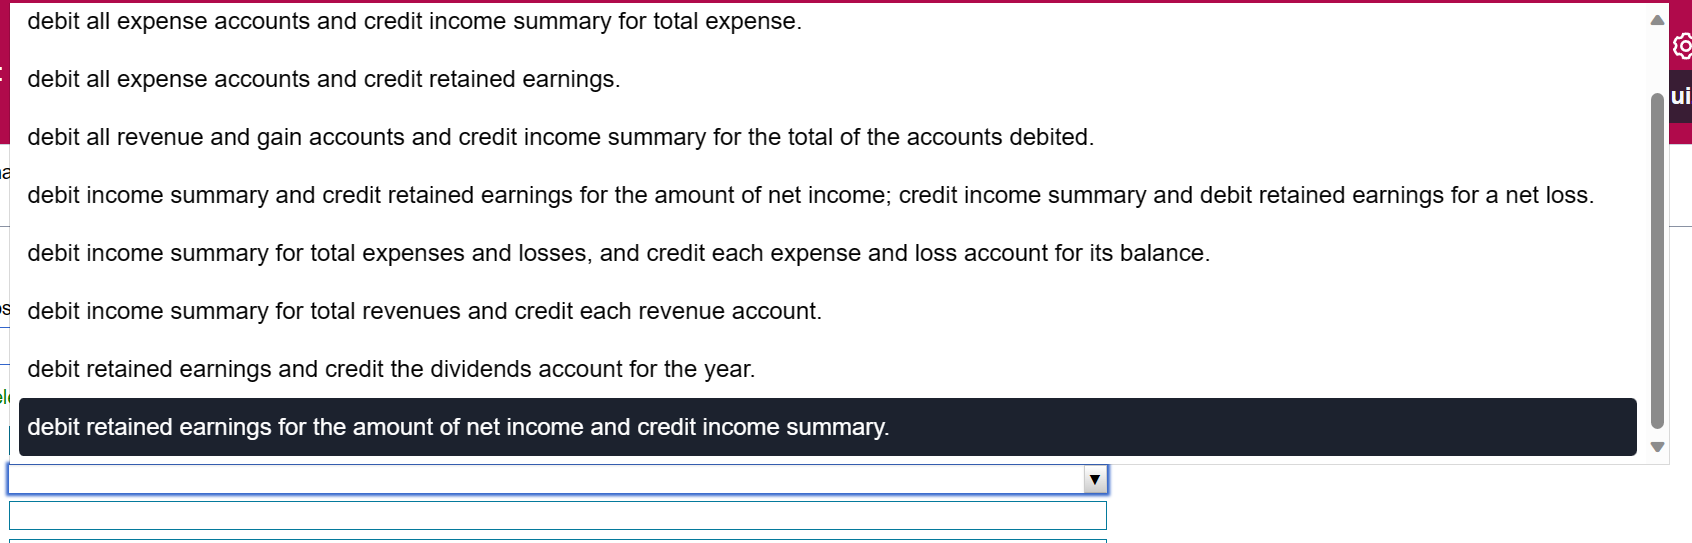 debit all expense accounts and credit income summary for total expense. debit all expense accounts and credit